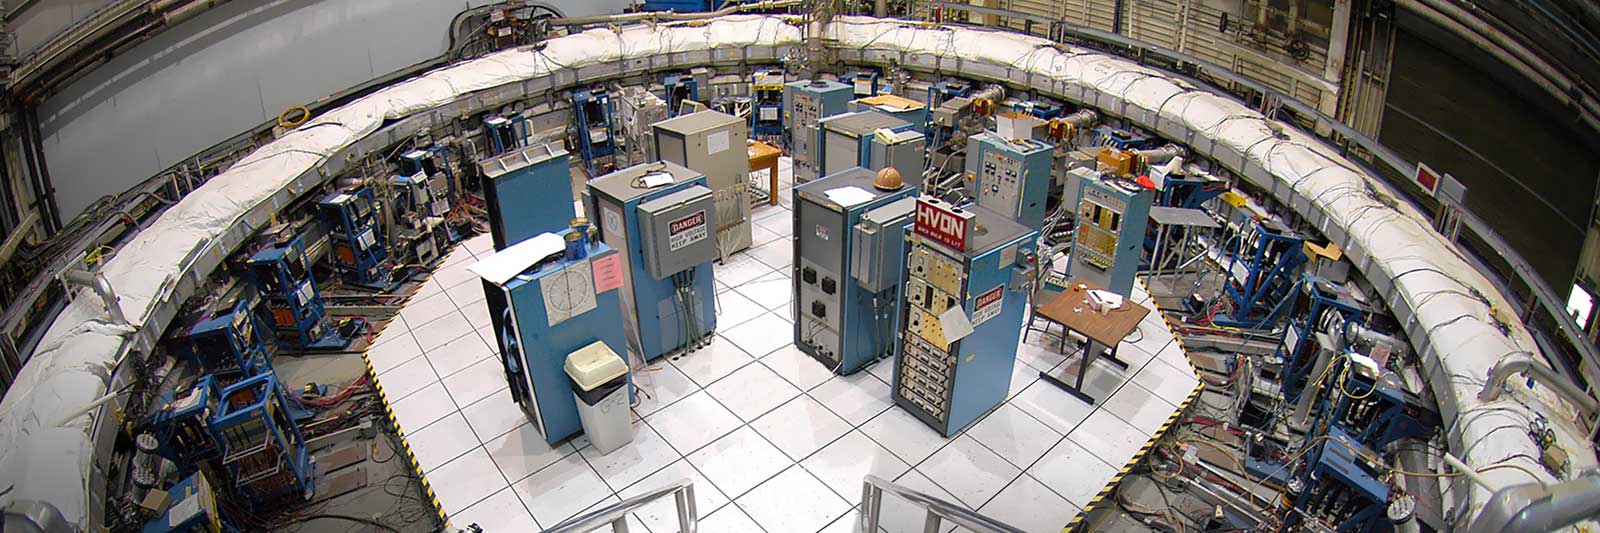 photo of the muon g-2 experimental apparatus